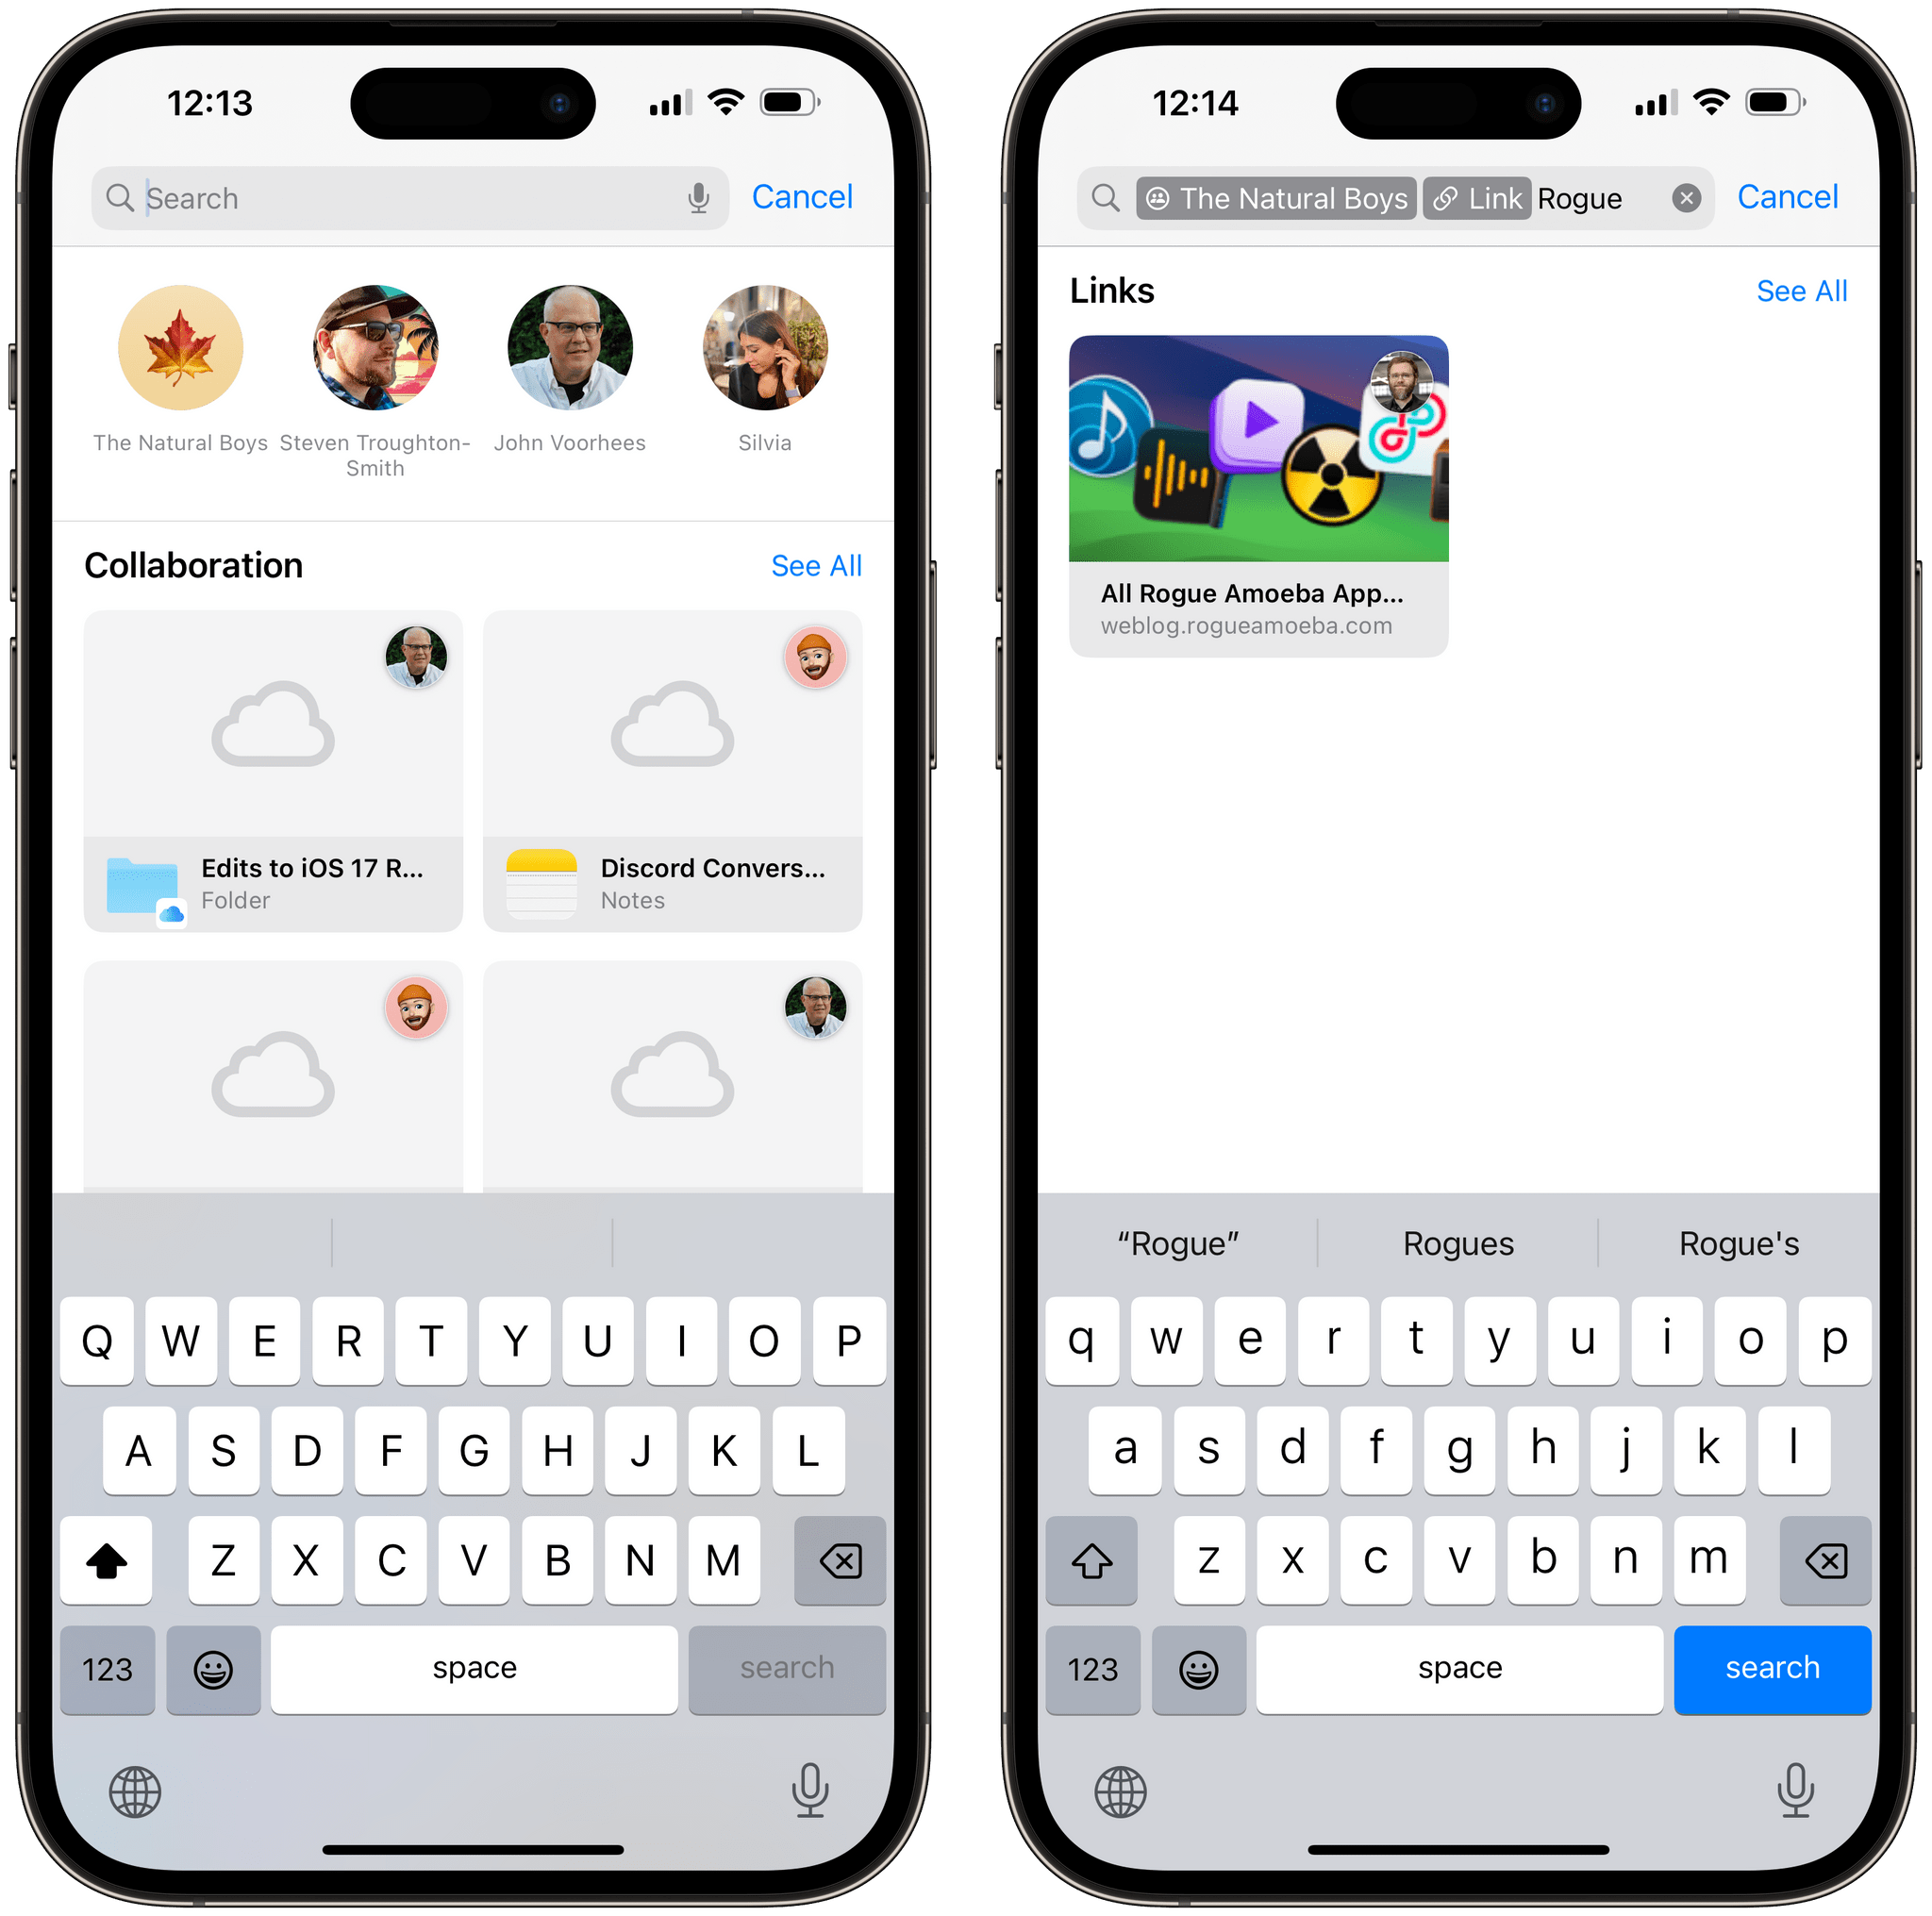 The new search interface of the Messages app.